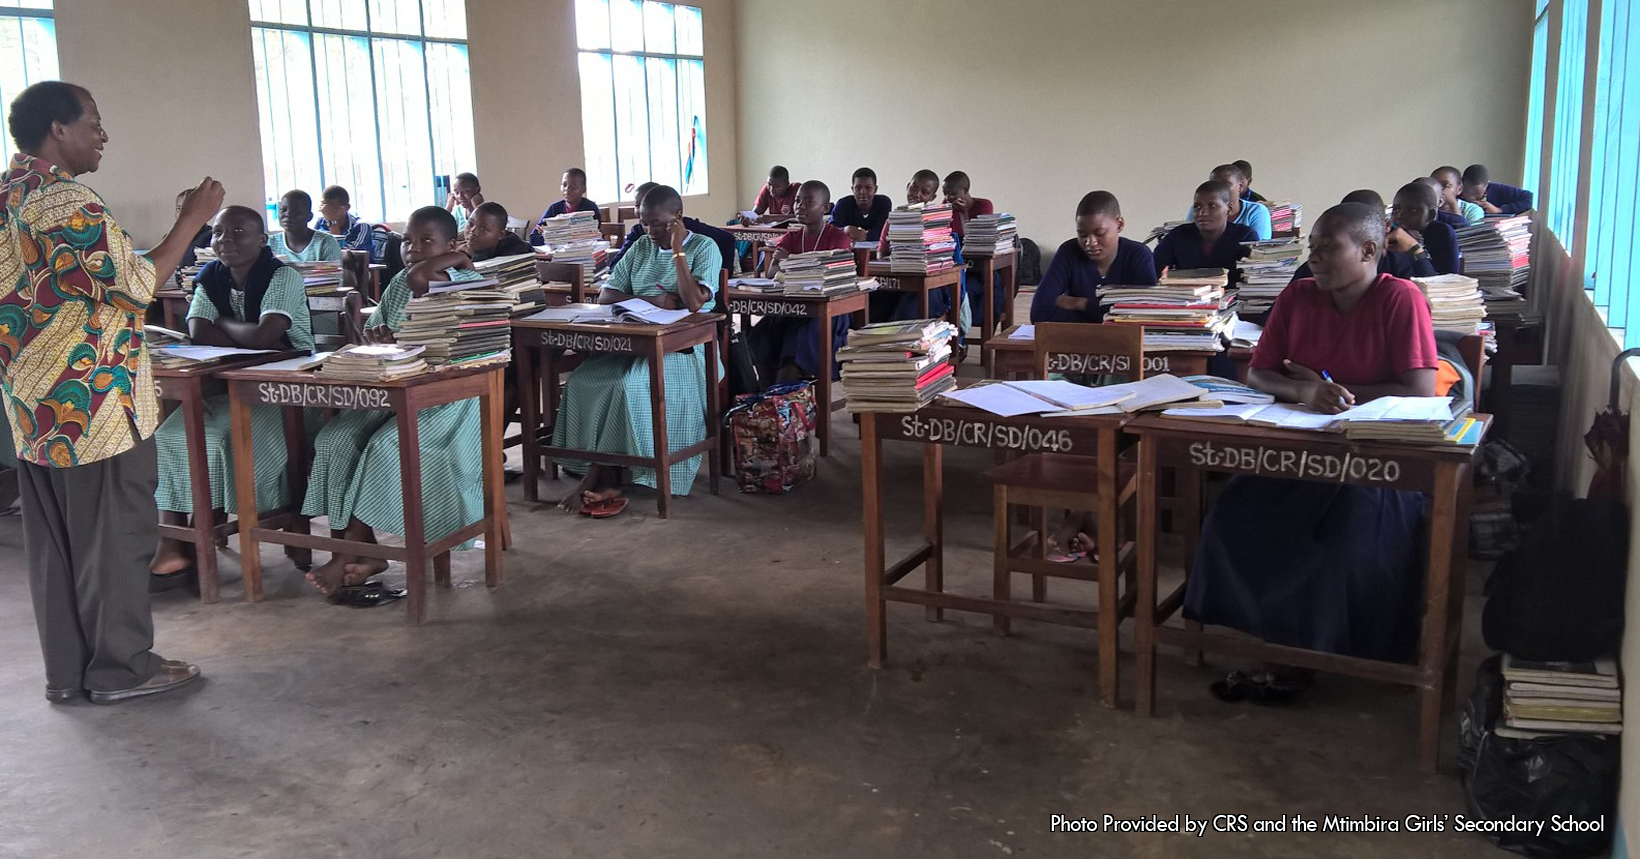 This associated picture was taken by the Catholic Relief Services inside one of the many classrooms. The girls in the classroom are sitting down in their desk preparing themselves for the rest of their lives. The girls in the picture are wearing a variety of clothing but some of them are wearing the same thing. For starters there are a couple of girls who are wearing teal dresses. Three of the 5 girls wearing the teal dresses are sitting in front of the teacher. As for another group of girls, some of them are wearing maroon polo shirts with a blue dress. For the last group of girls they are wearing dresses as well but they are also wearing a dark blue sweater. On top of every desk that the girls are sitting on have multiple books and papers. These are the textbooks that the girls are using to educate themselves as well as notes they have taken and are taking. In addition, written on each of the girl’s desk there are multiple letters and numbers used for labelling. Each desk has the following letters “St-DB/CR/SD” followed by different numbers depending on the desk. Furthermore, all of the girls sitting in the classroom are wearing sandals, some of them being black in color while others are multi-colored. Standing in front of the girls is the teacher for this classroom. He is wearing a shirt with leaves scattered throughout. In addition, the teacher is wearing brown khaki pants and brown sandals. The classroom the girls are sitting in is part of the Mahenge School used to educate the girls. The classroom is white in color, with the floor being gray in color. In addition, the windows of the classroom are blue when you look at them from the side, but are clear looking through them.